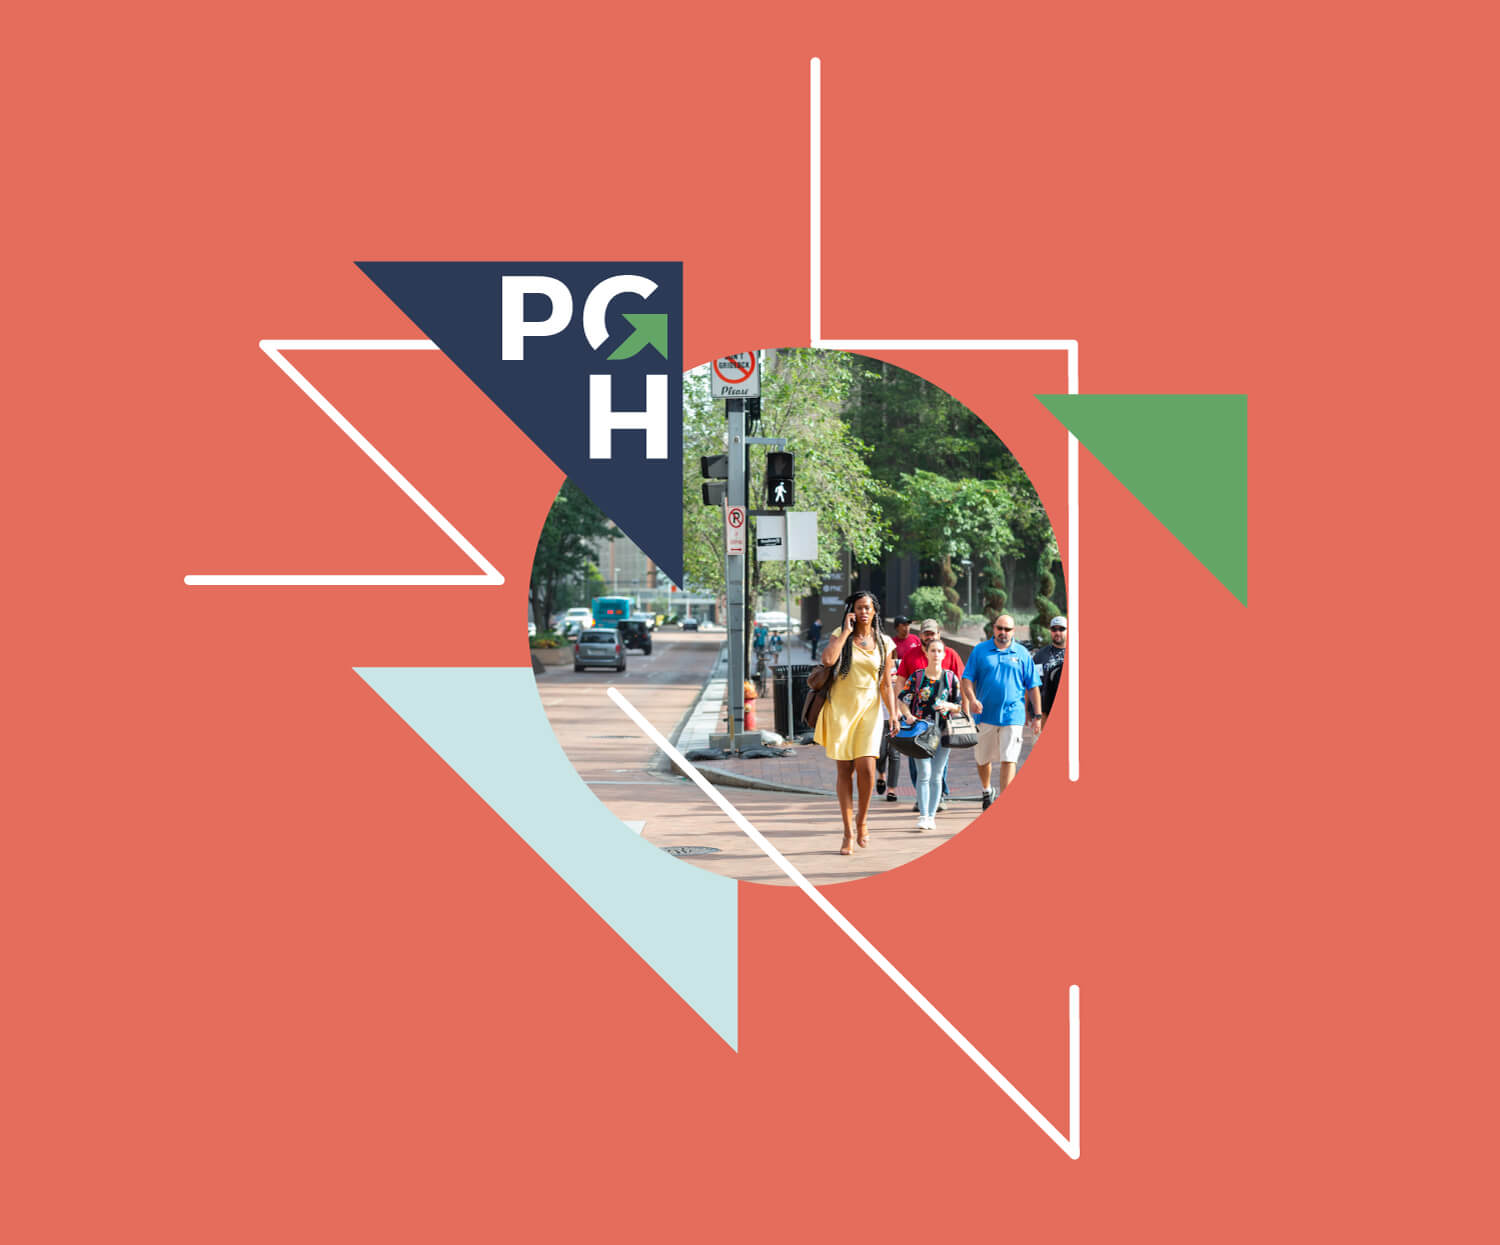 A PGH logo surrounded by branded graphics and an image of people walking downtown.